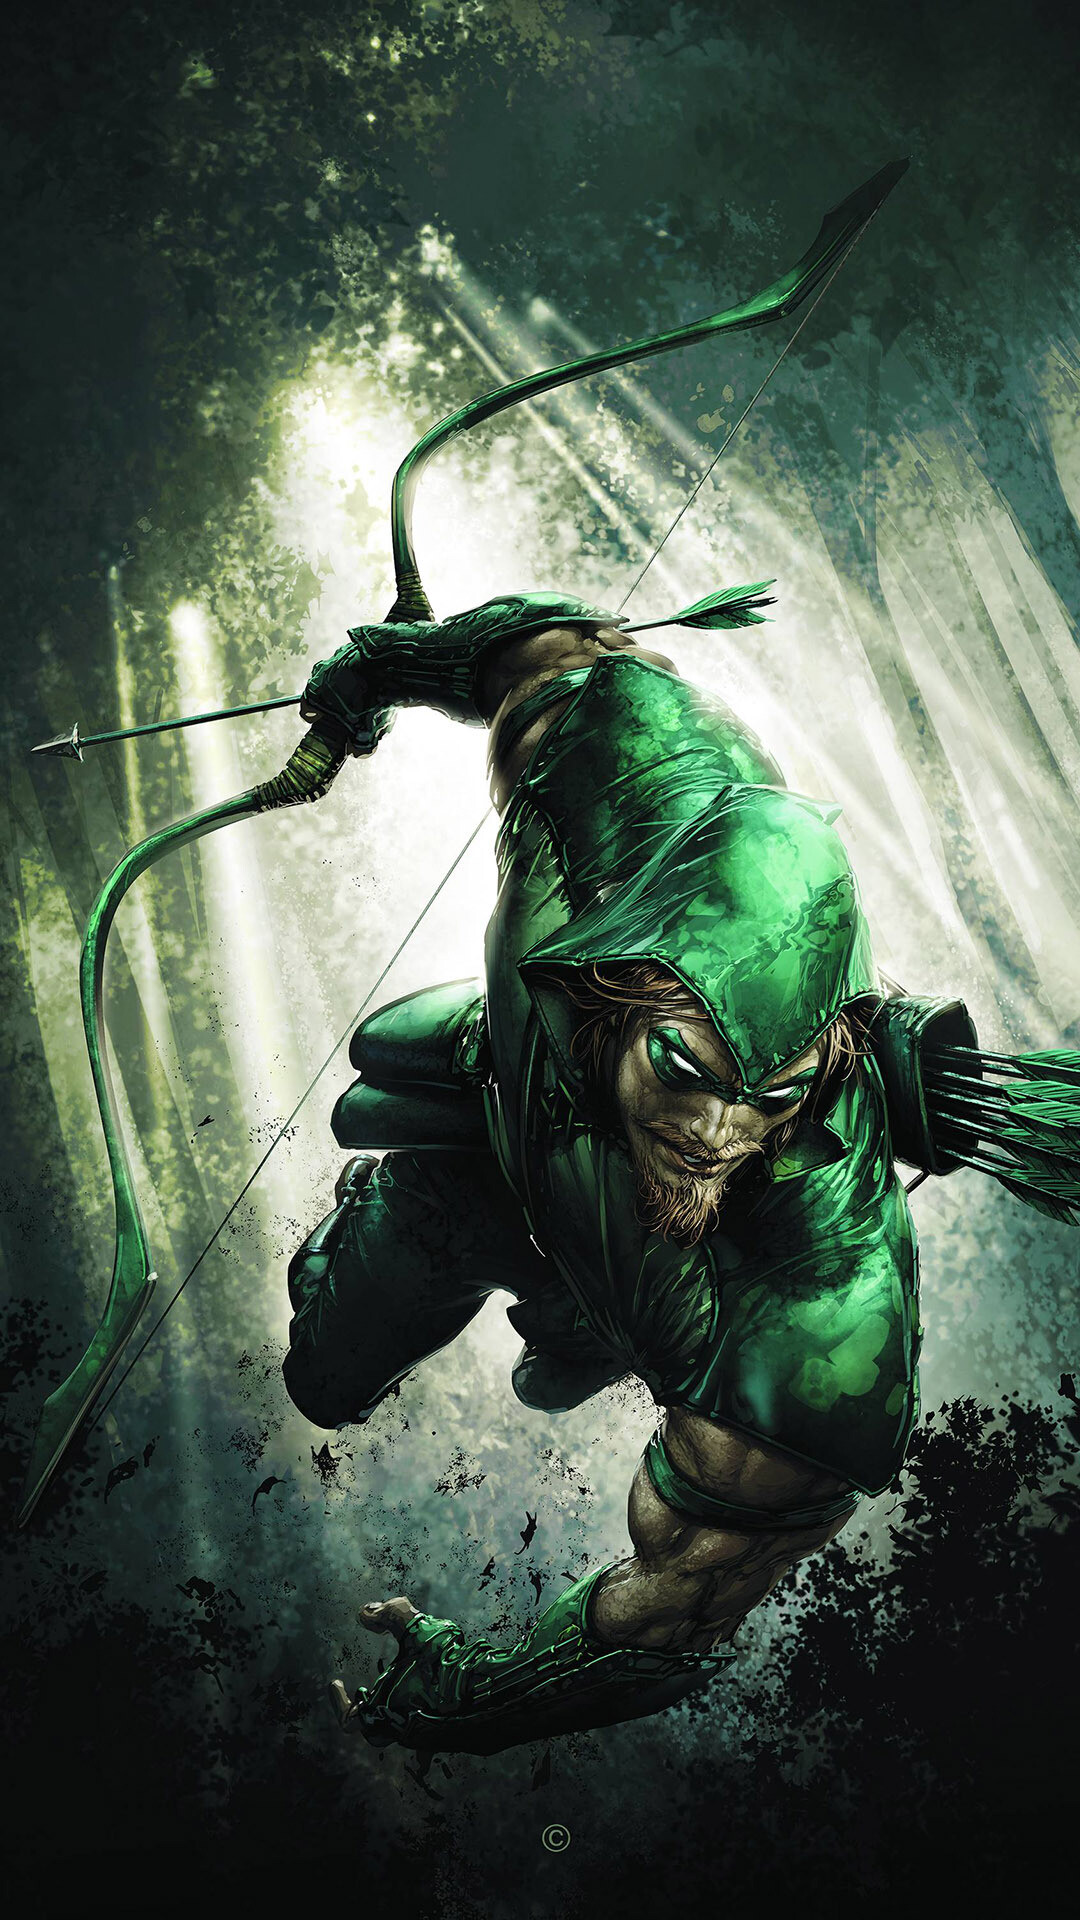 Green Arrow: An archer who uses his skills to fight crime, Fictional character. 1080x1920 Full HD Wallpaper.